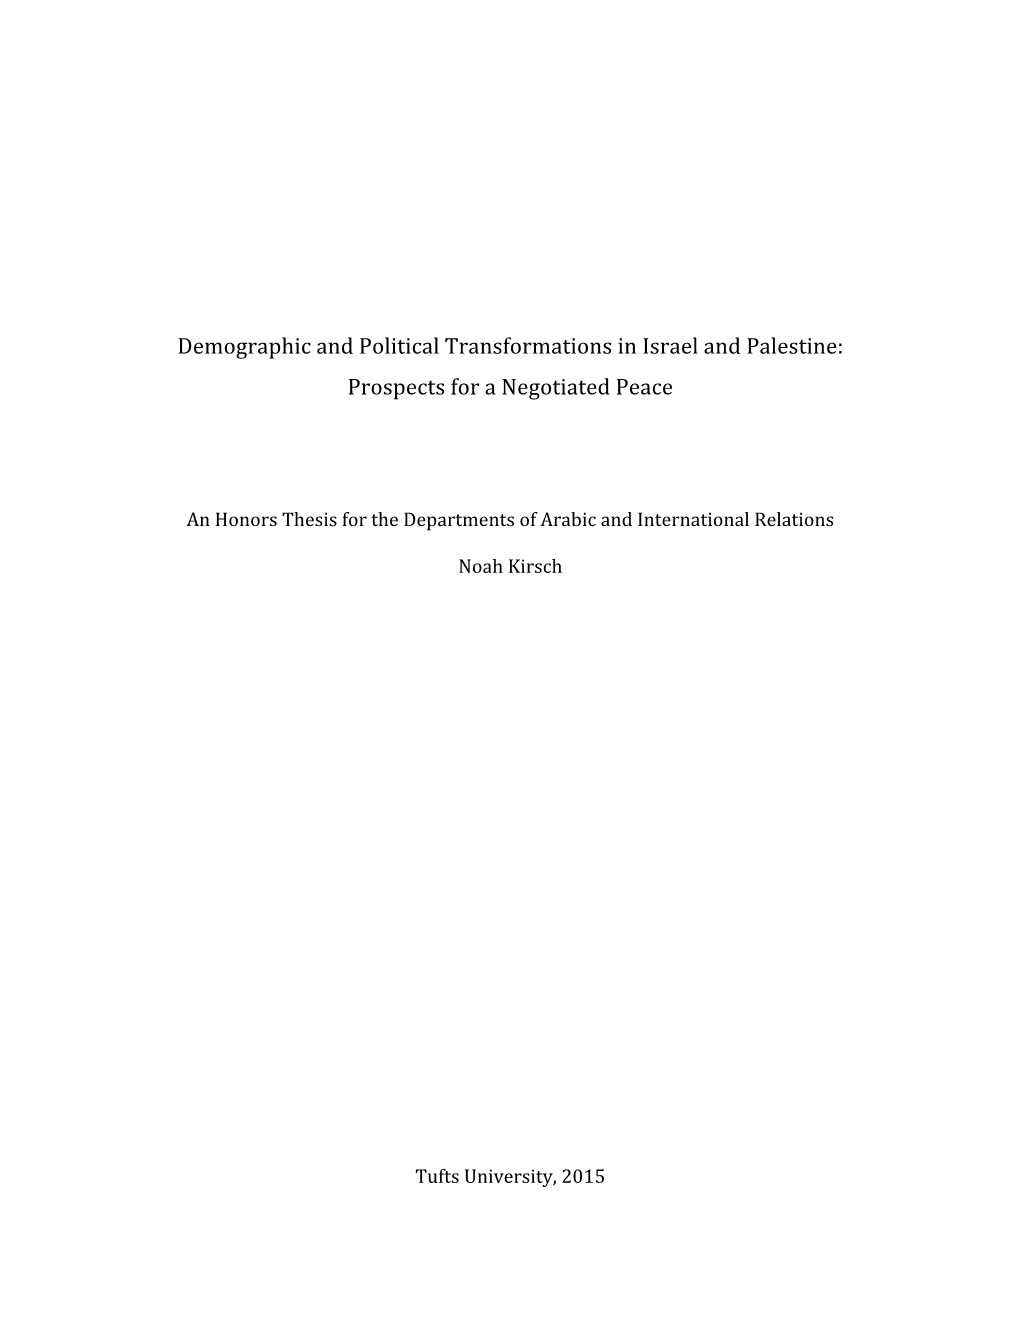 Demographic and Political Transformations in Israel and Palestine: Prospects for a Negotiated Peace